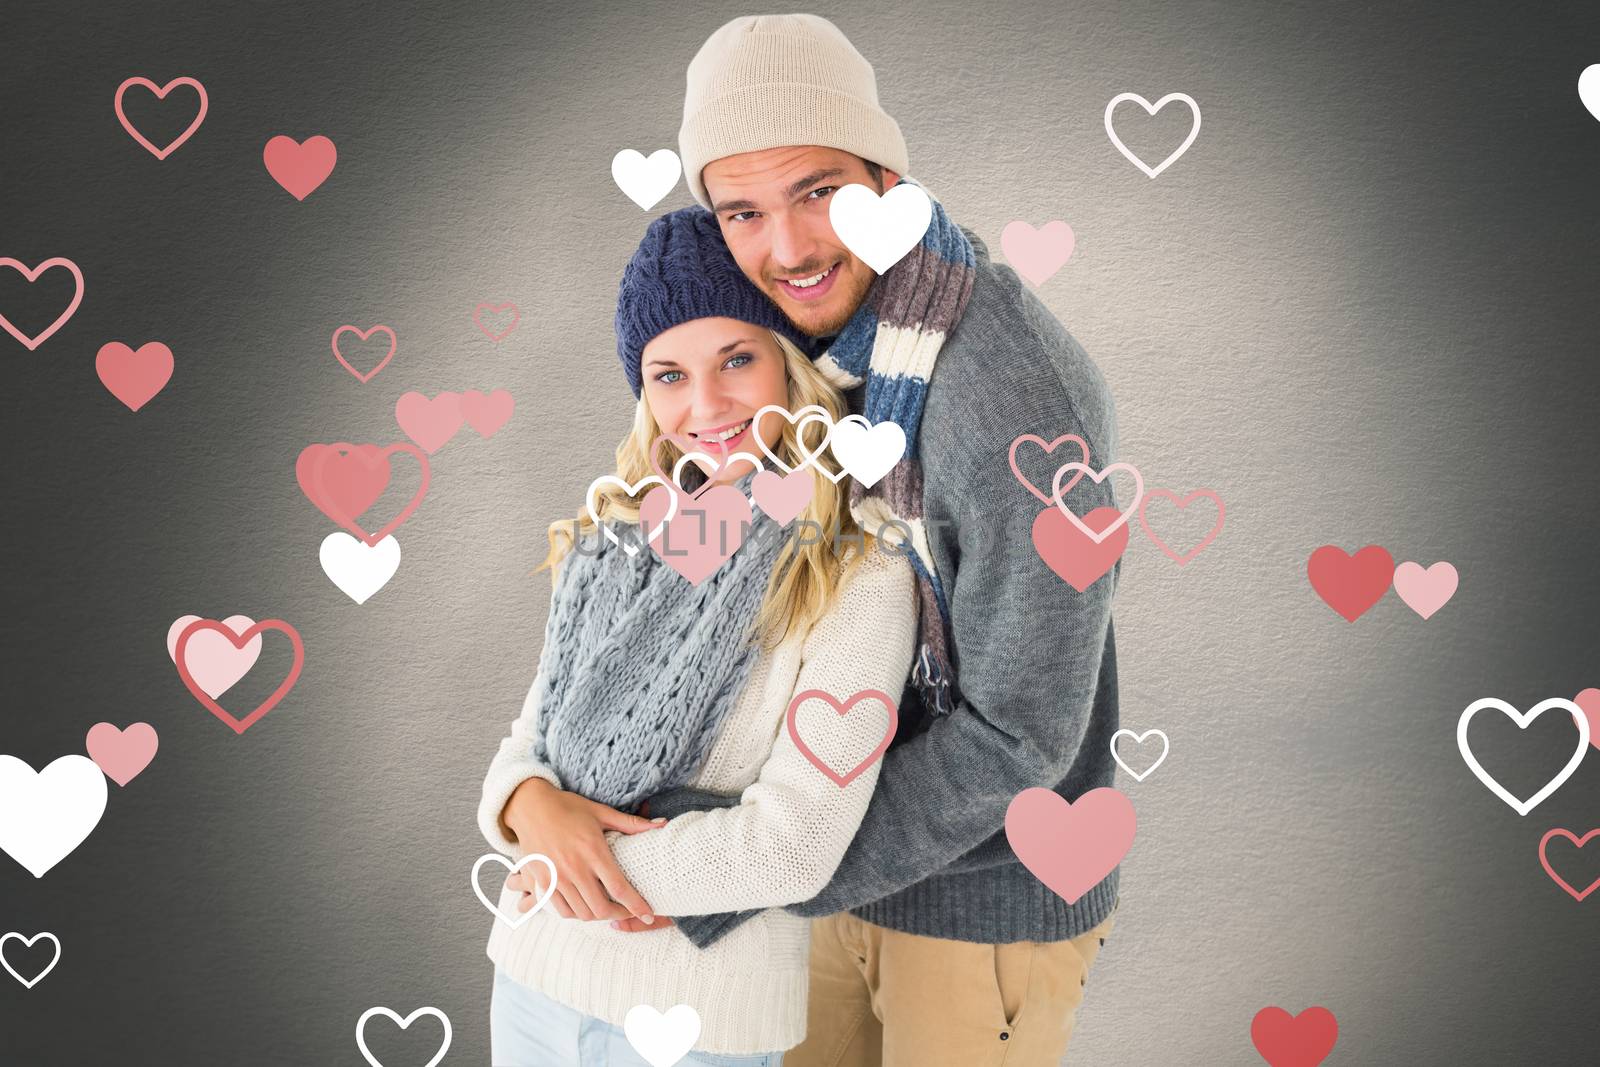 Attractive couple in winter fashion hugging against white background with vignette